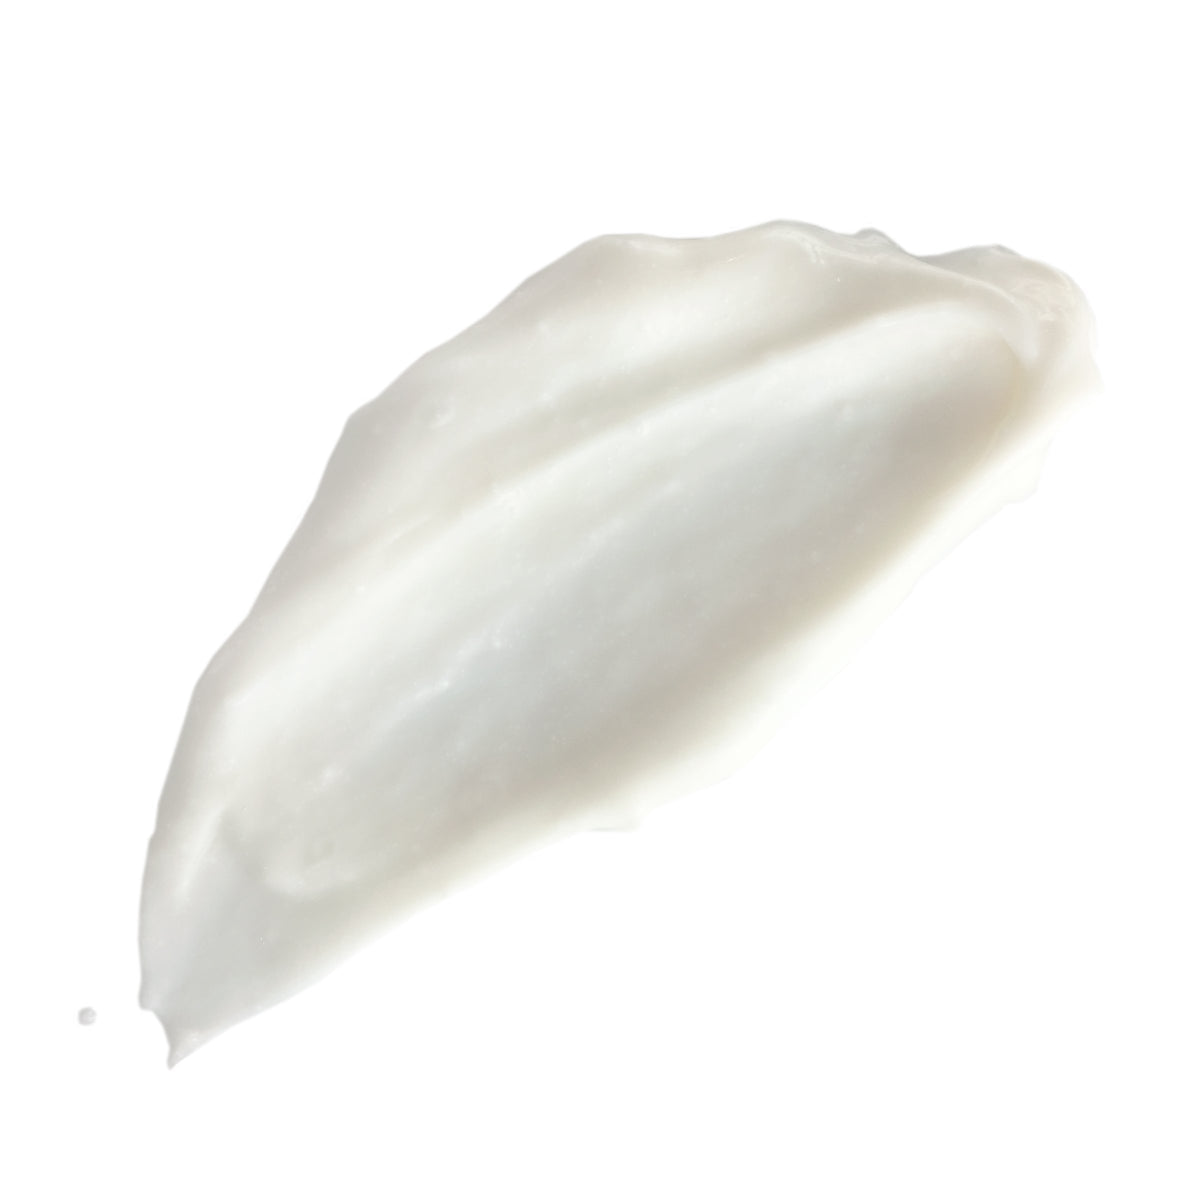 Cleanser Concentrate, creamy white texture.